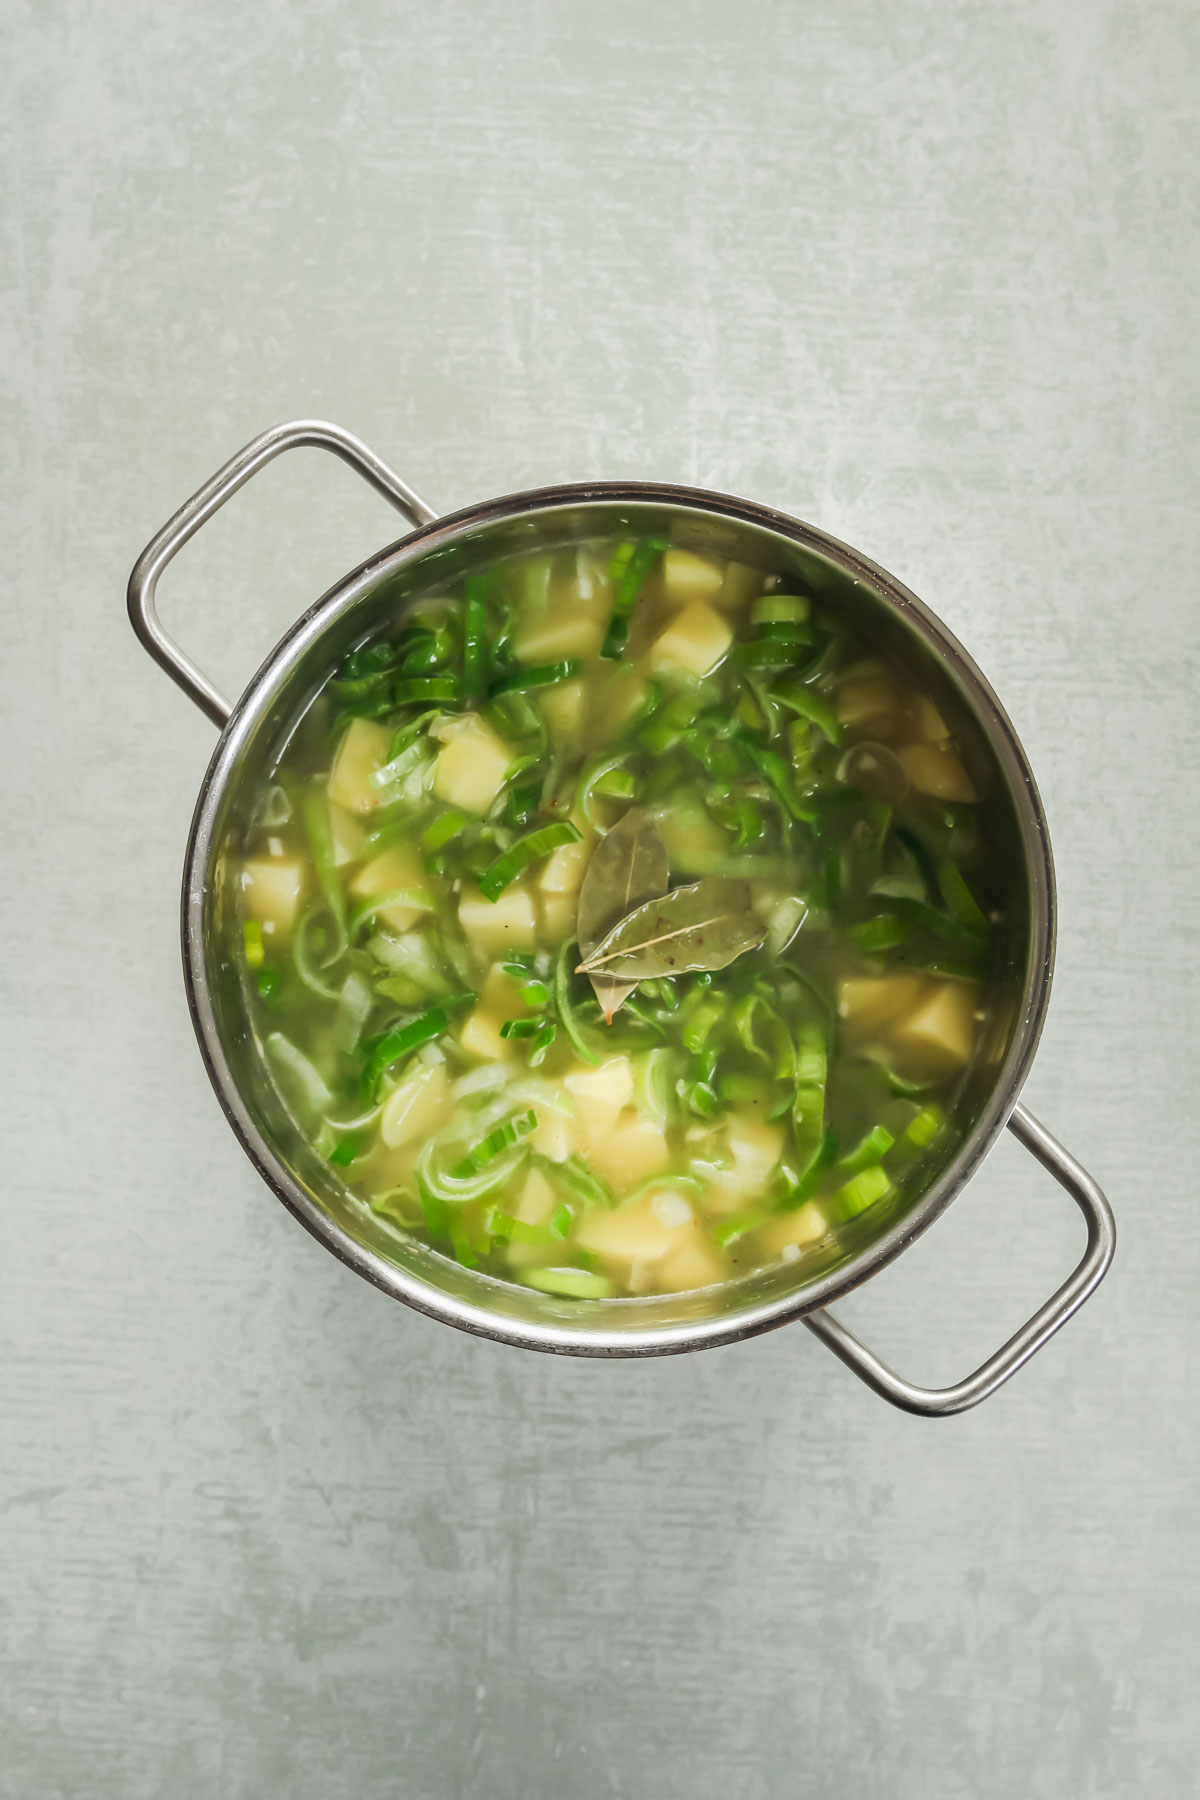 potatoes, leek, onion, garlic, bay leaves and vegetable stock in pot on green background.